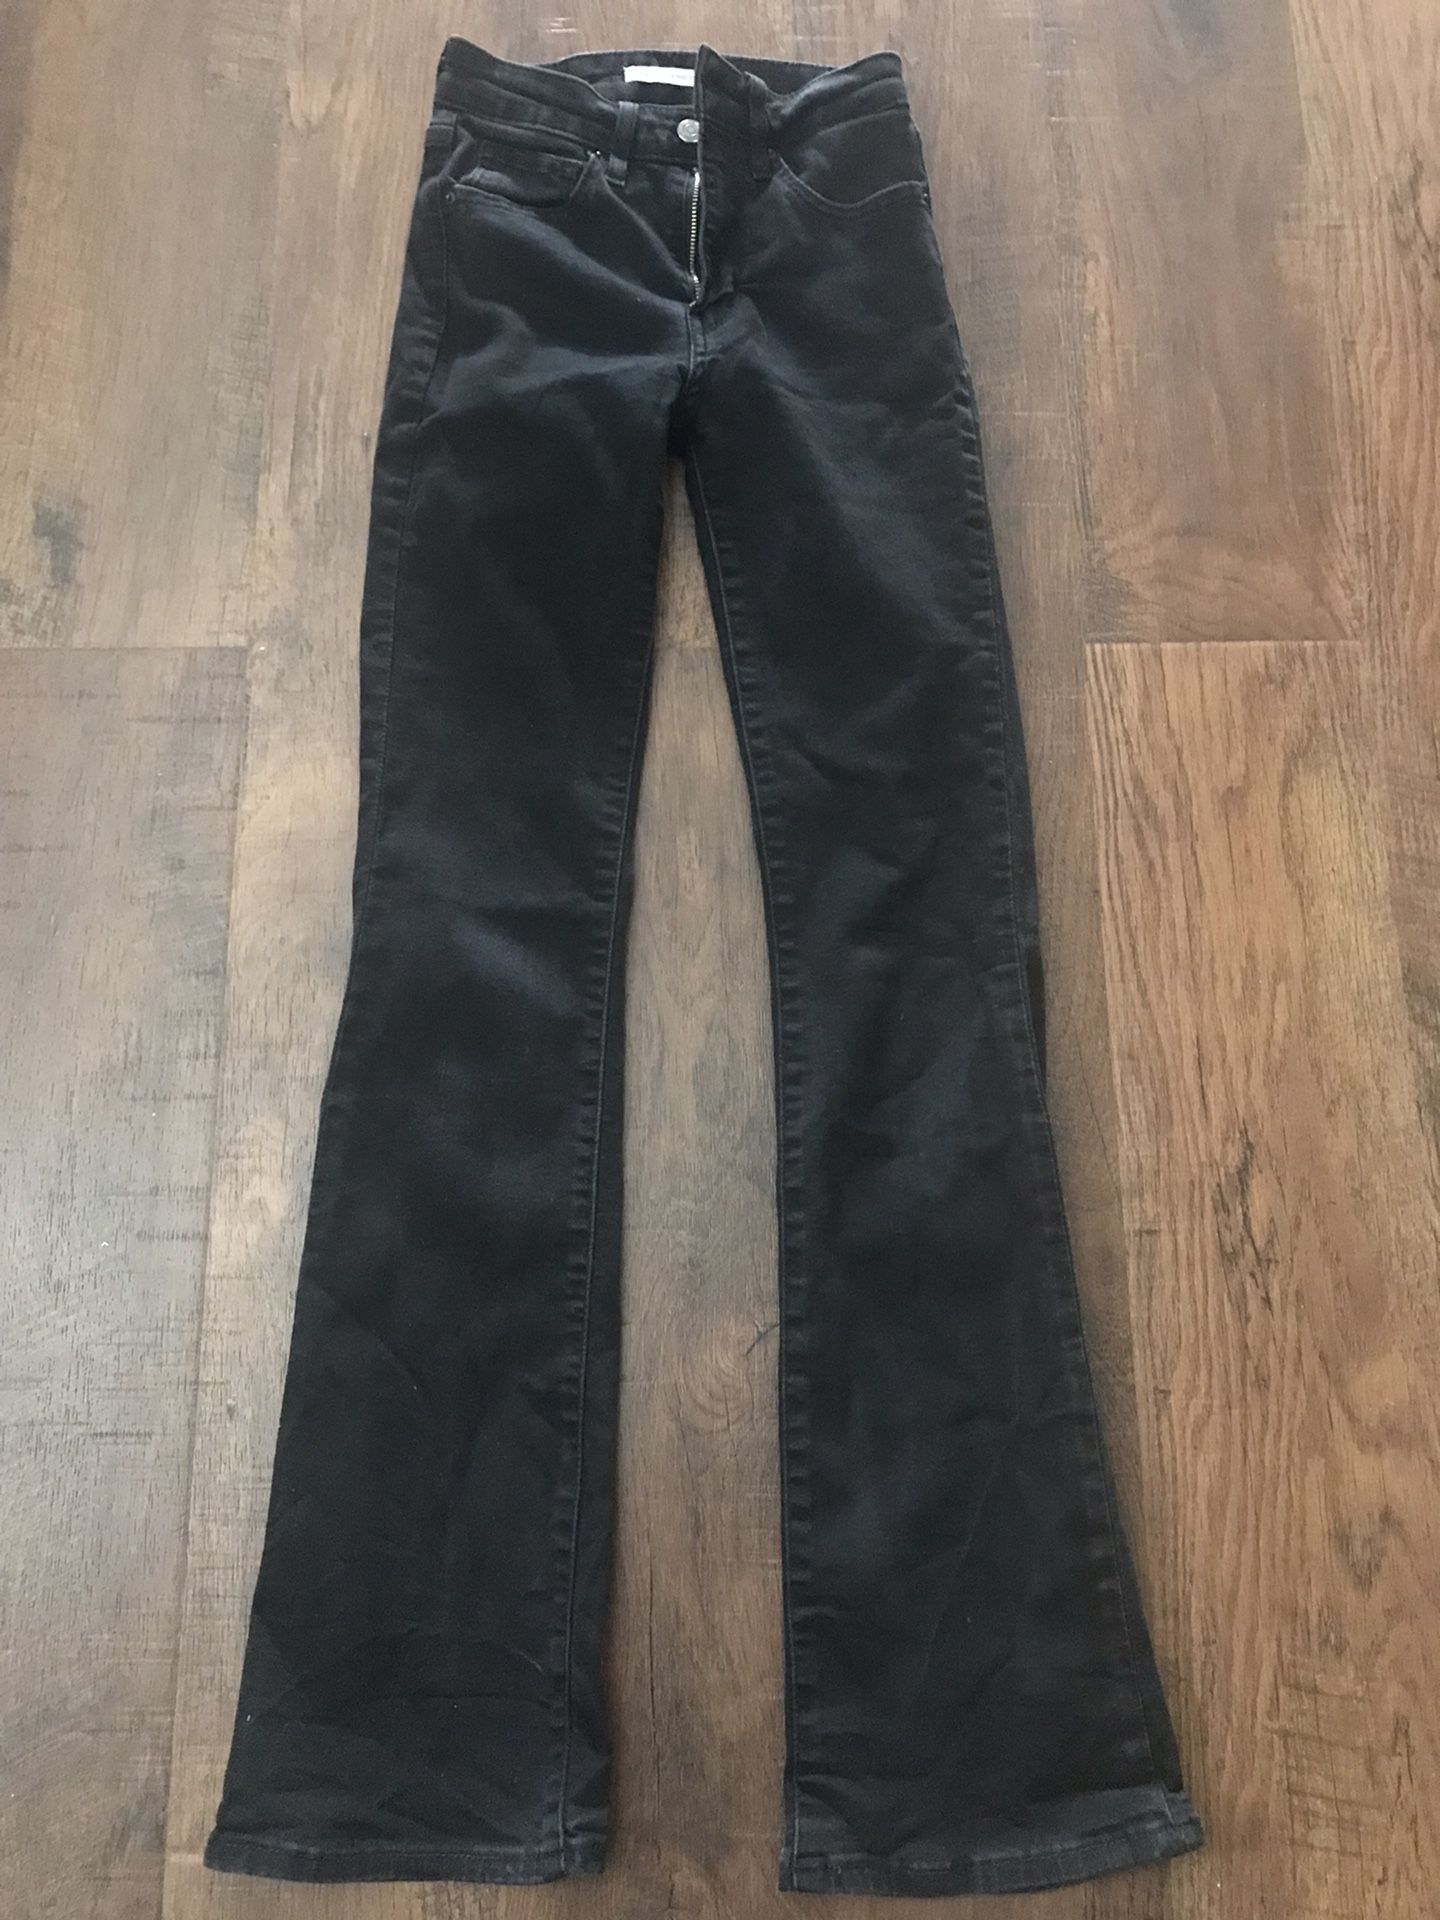 Levi's For Women ( 725 High Rise Bootcut) Size 24 Pickup In Southwest  Bakersfield for Sale in Bakersfield, CA - OfferUp